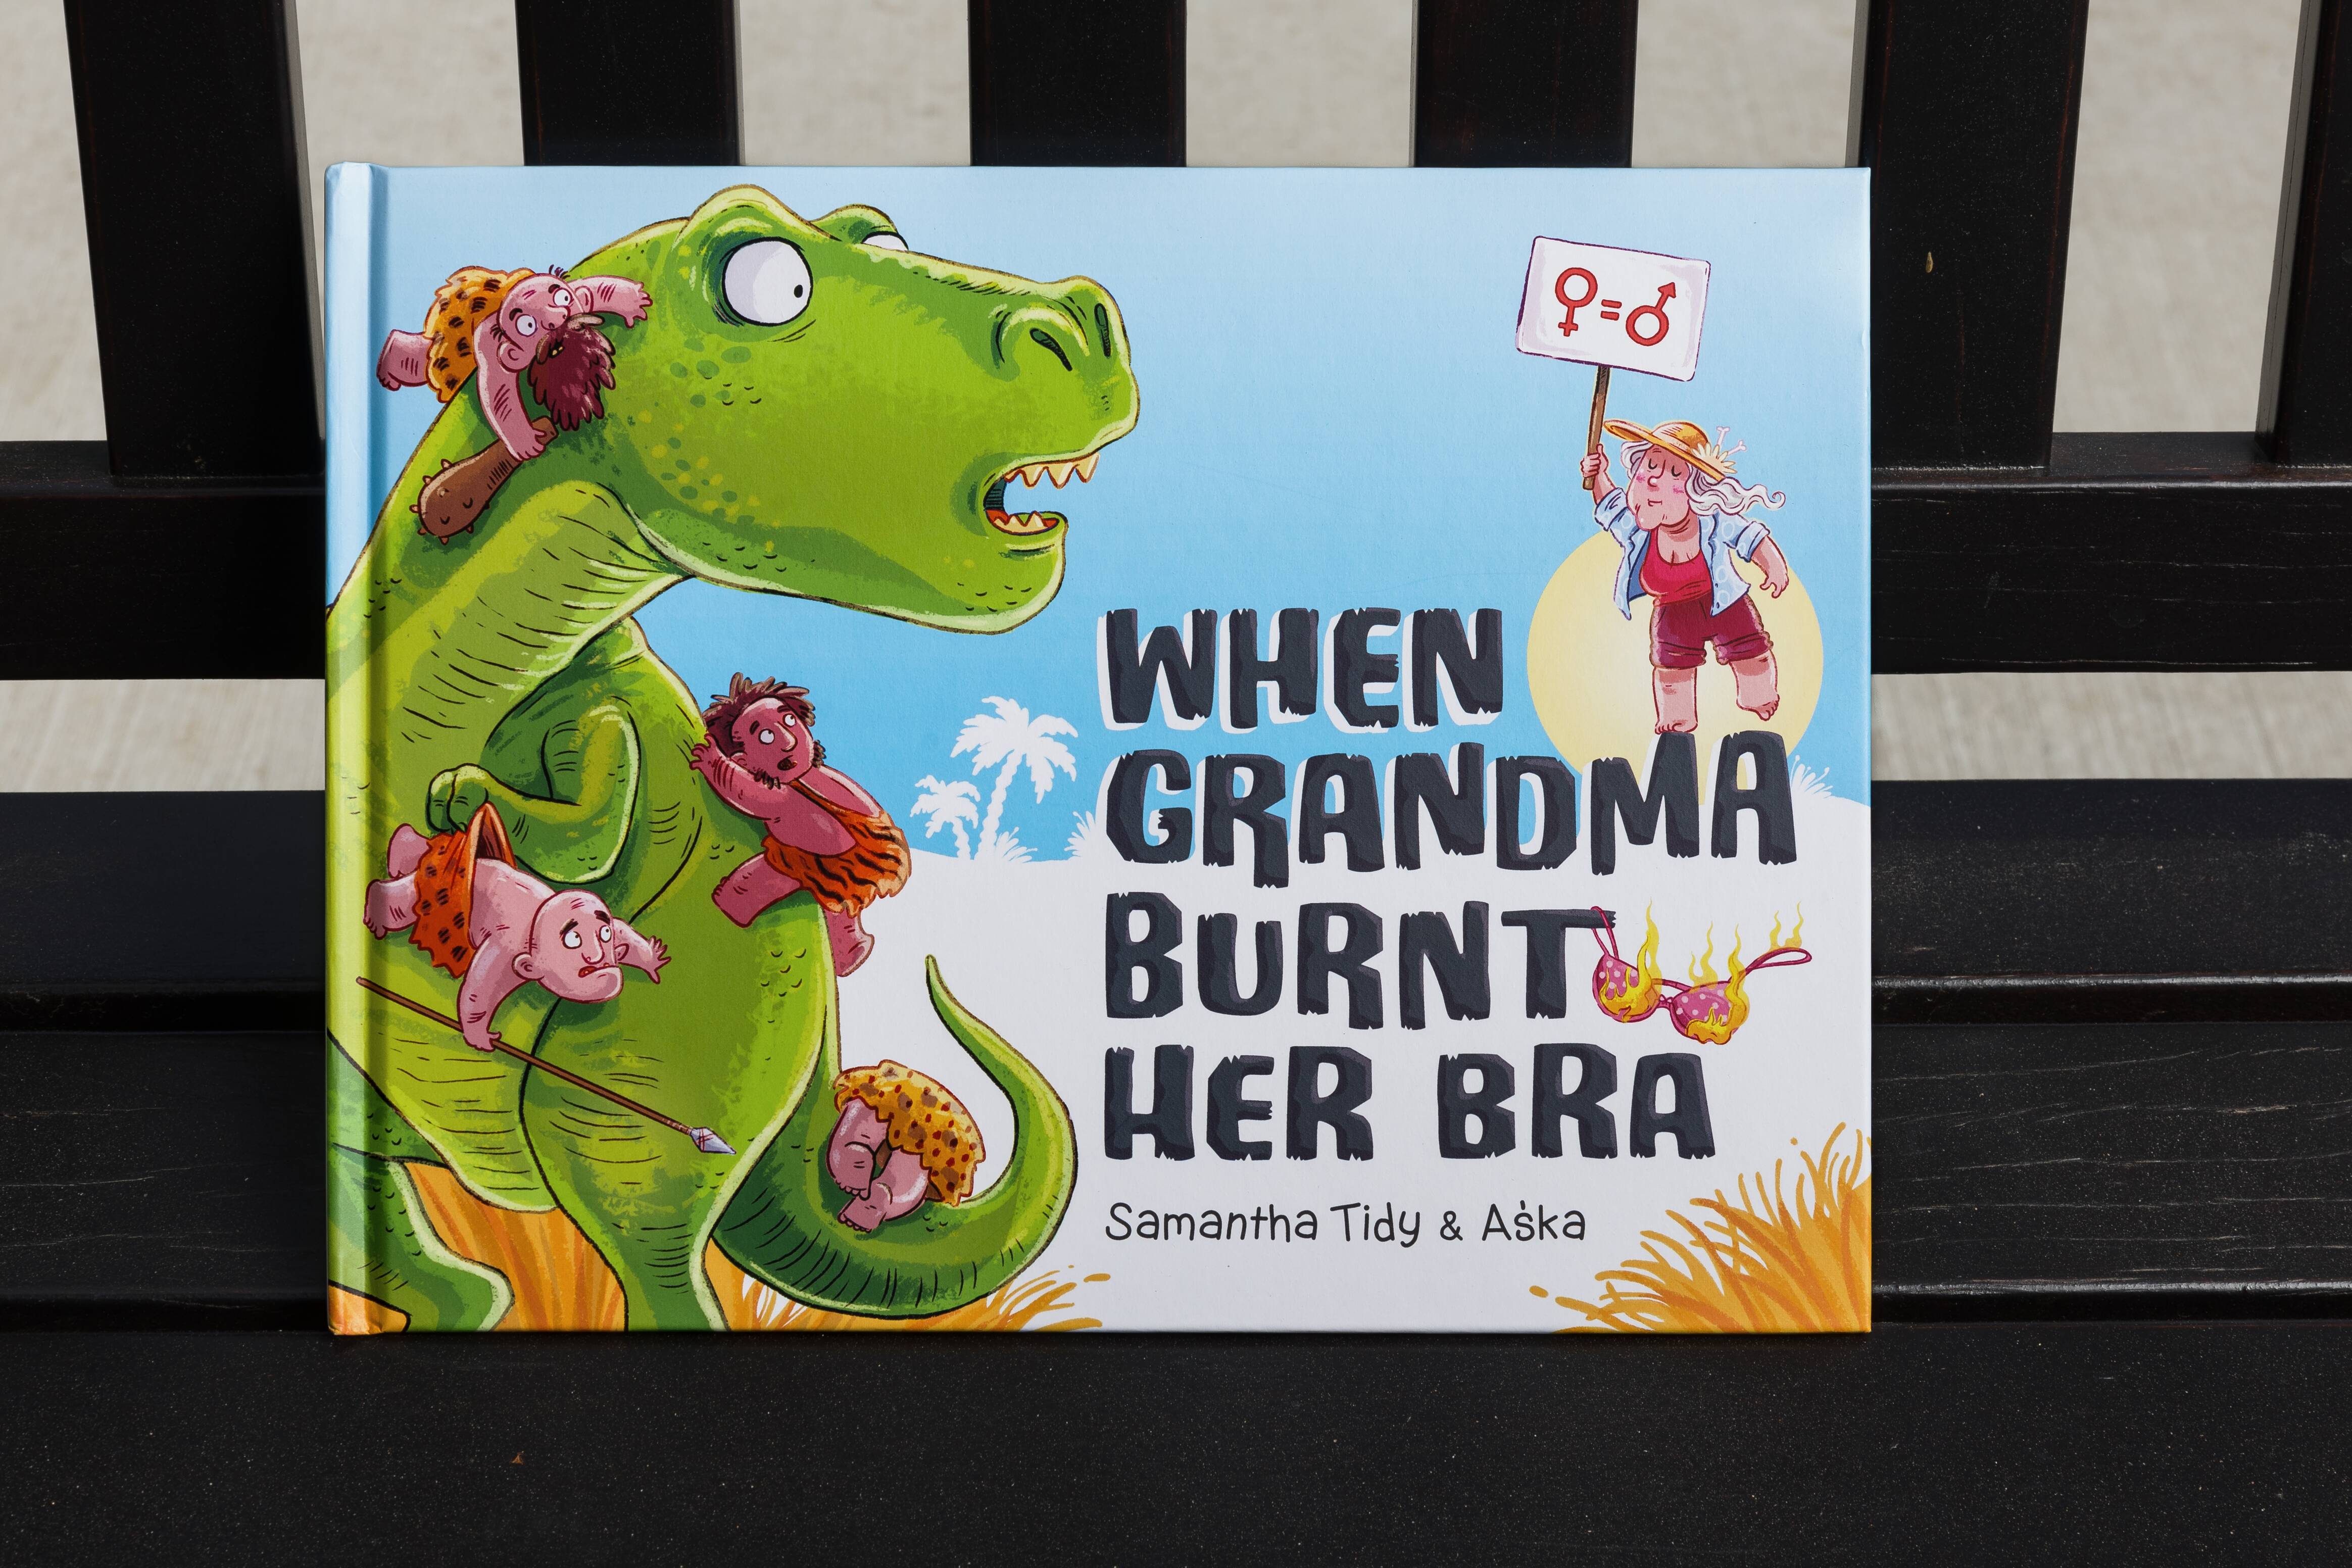 When Grandma Burnt Her Bra, by Samantha Tidy, sees feminism and dinosaurs, The Canberra Times